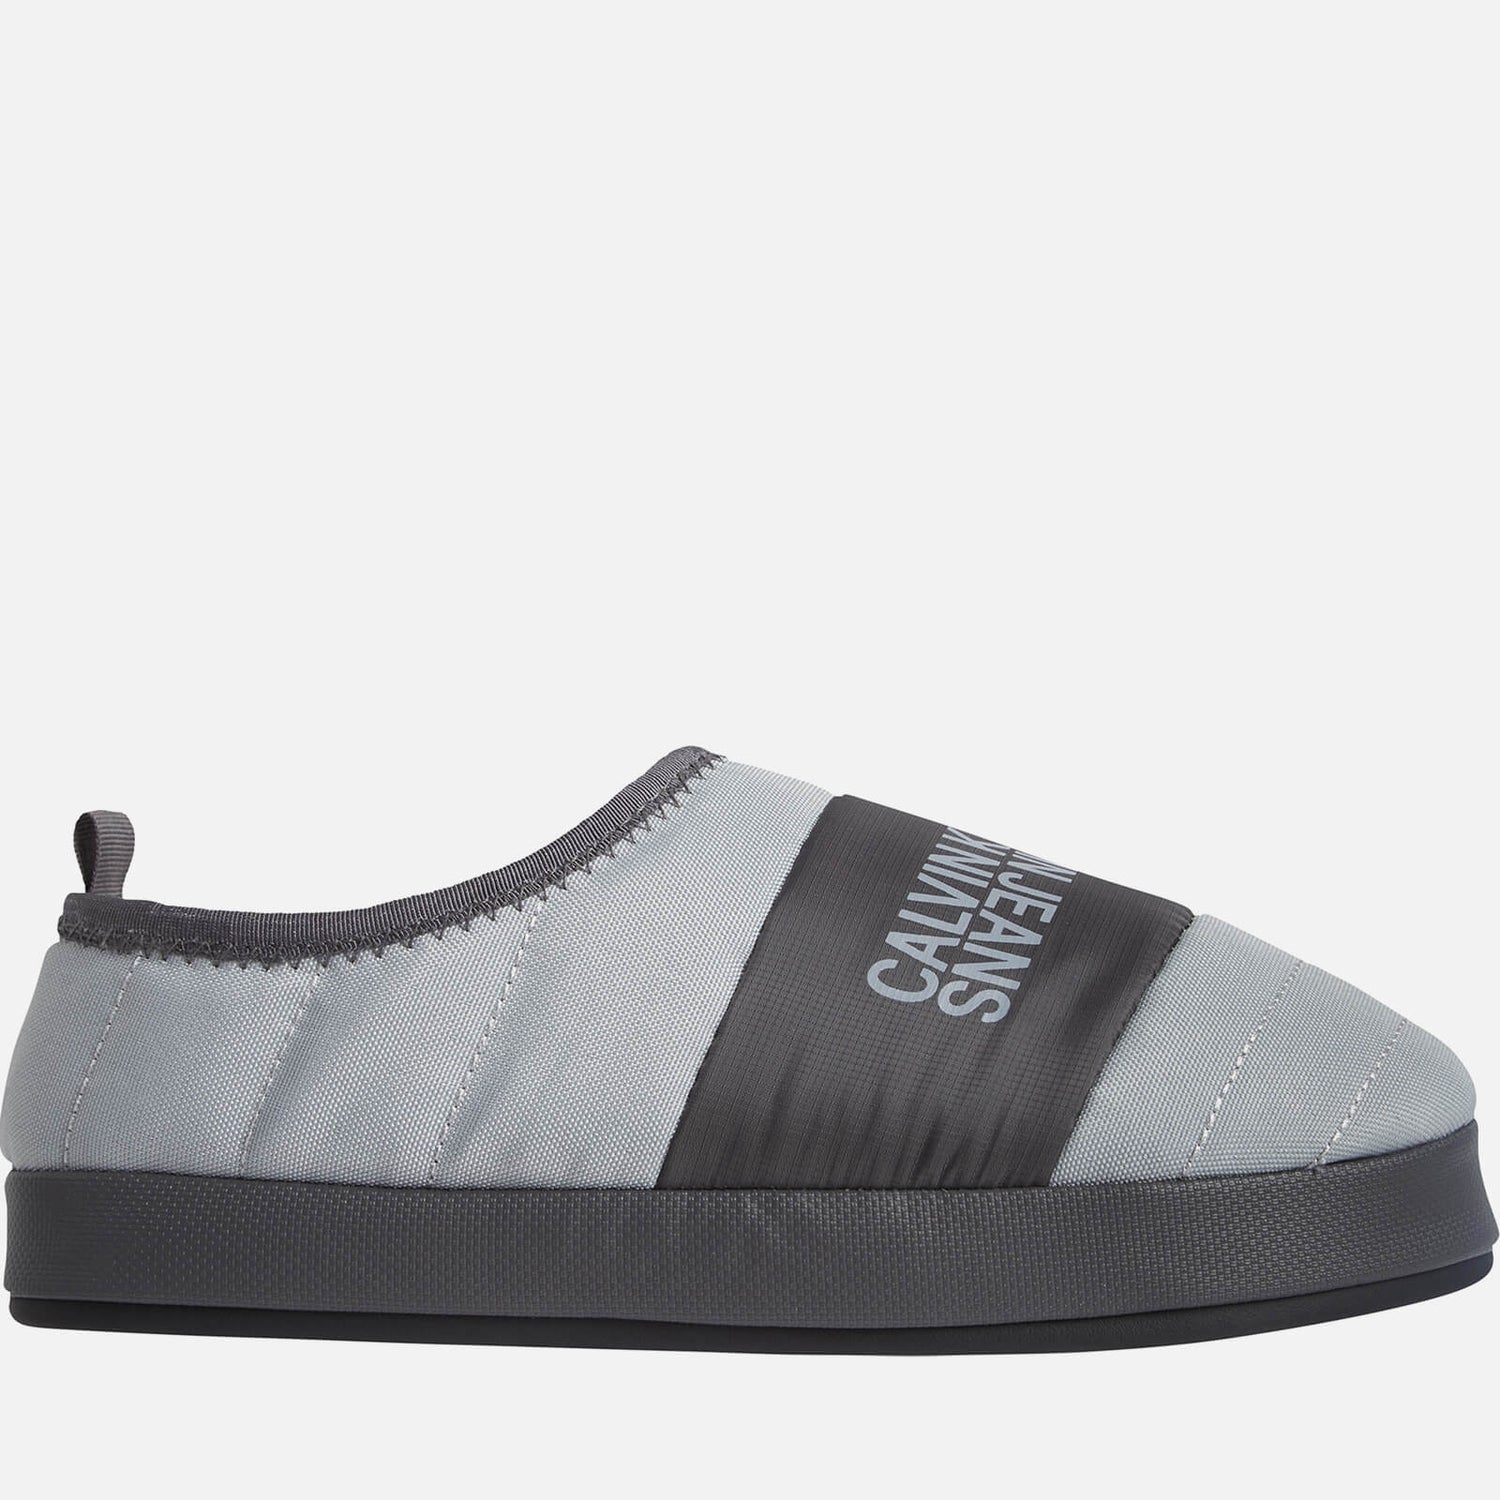 Calvin Klein Jeans Men's Warm Lined Sustainable Slippers - Marble Grey - UK 7